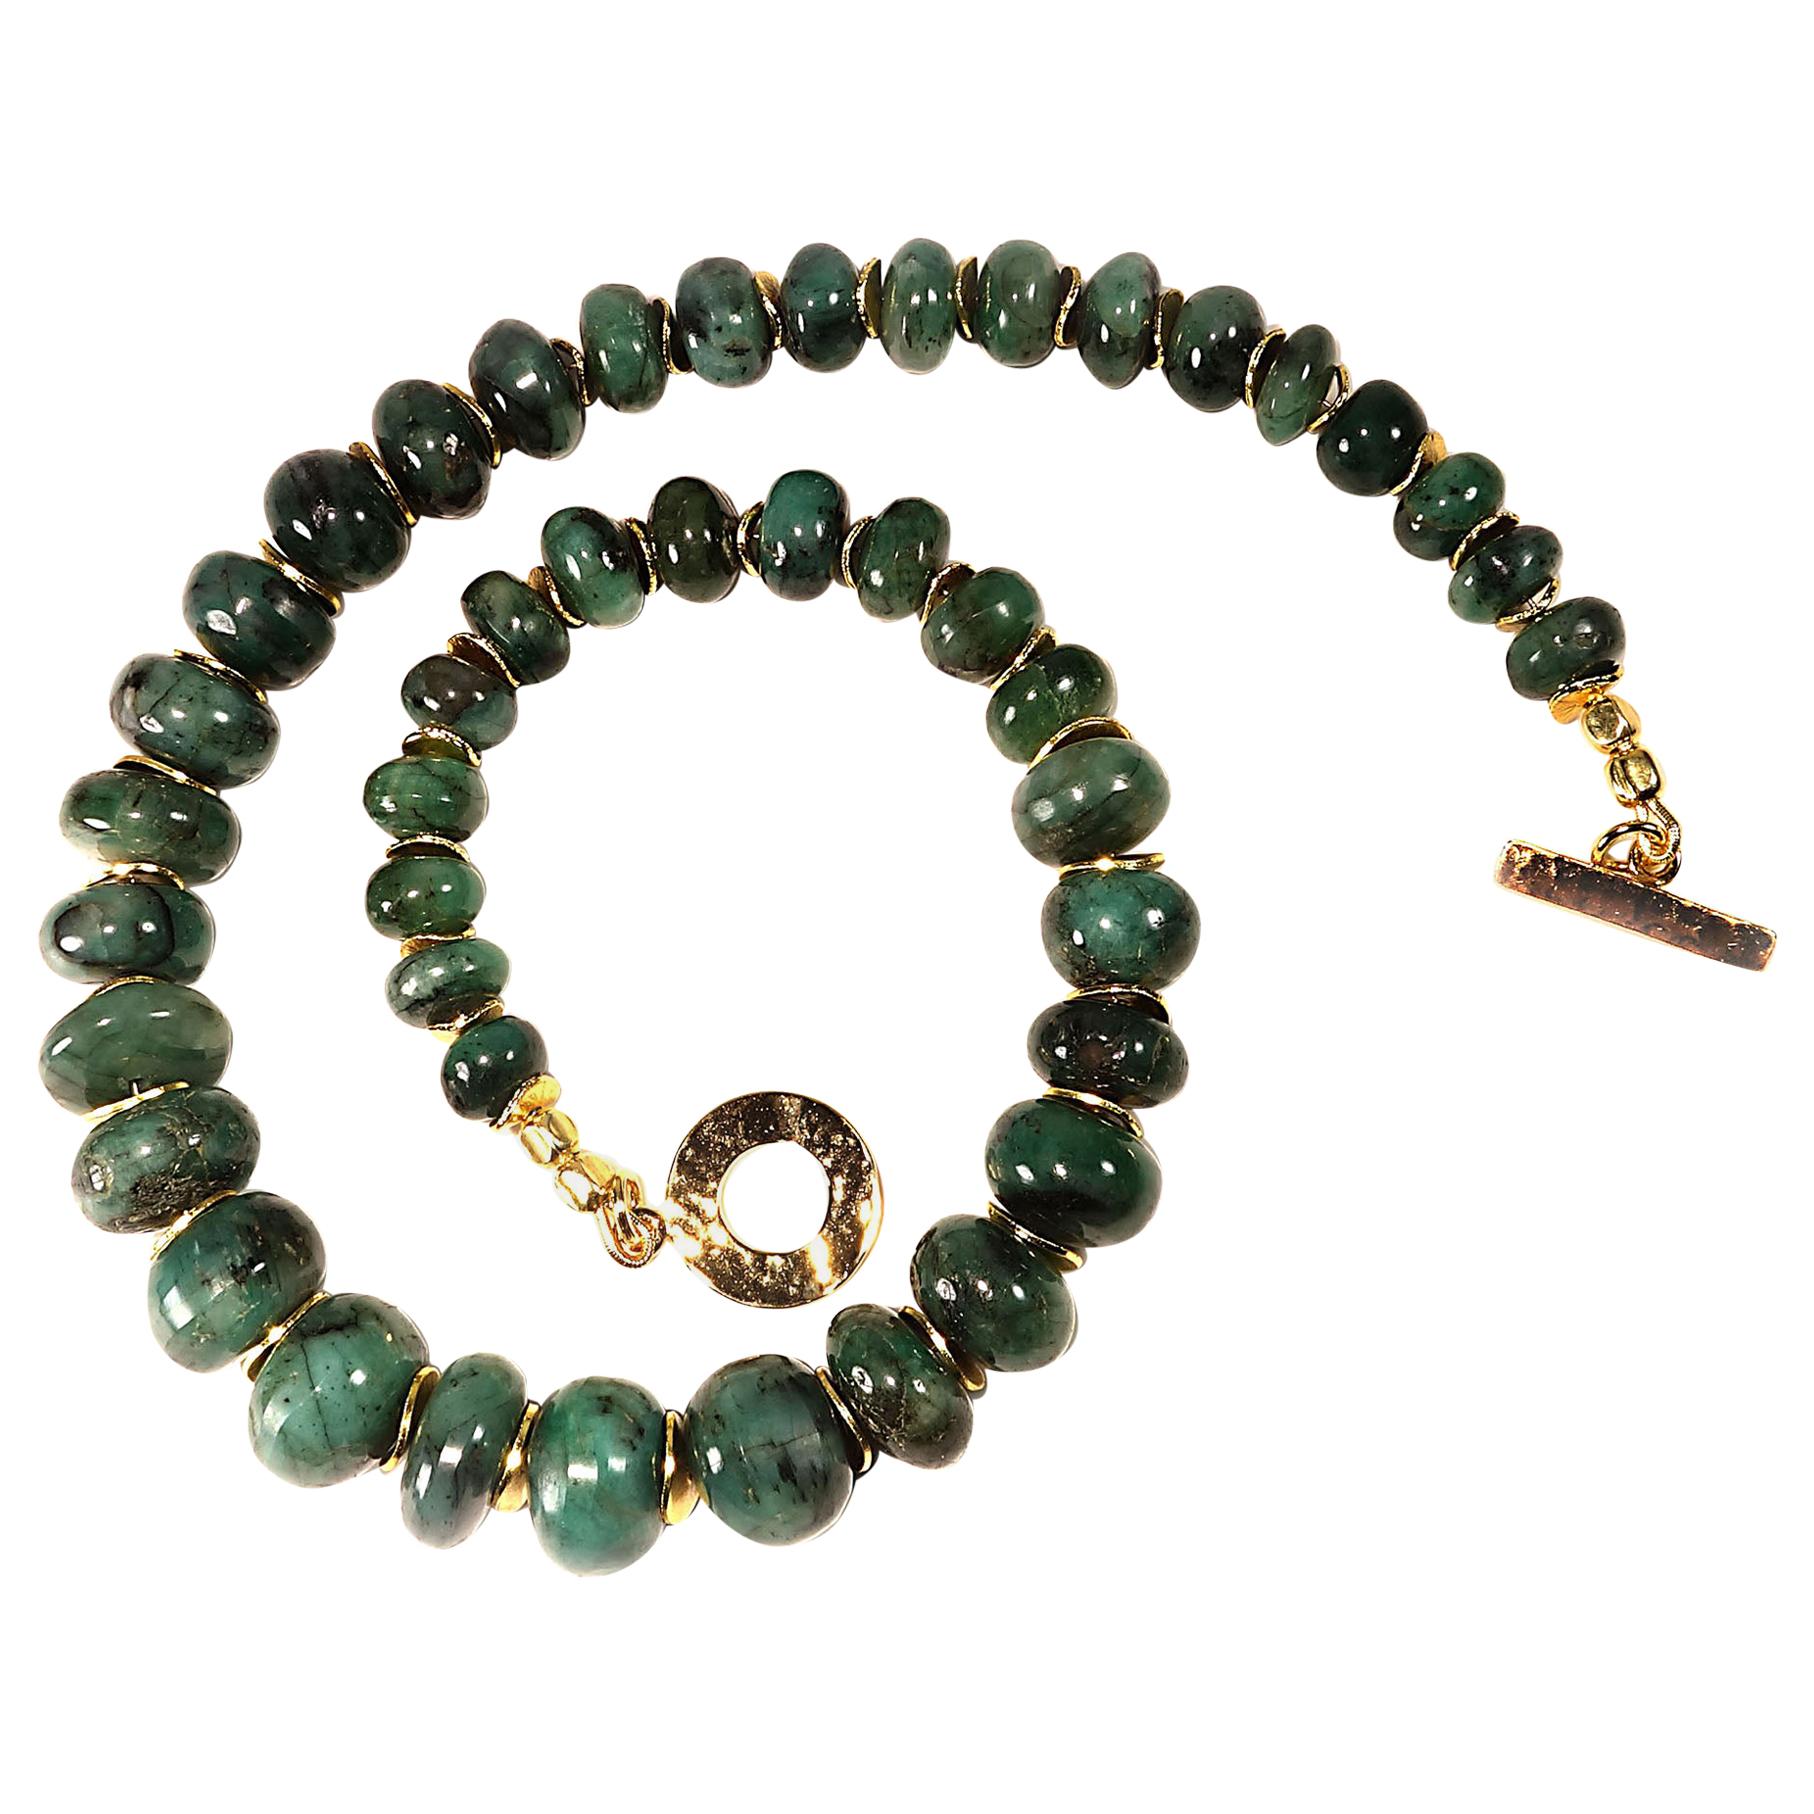 Graduated Emerald Rondel Choker Necklace with Gold Vermeil Clasp